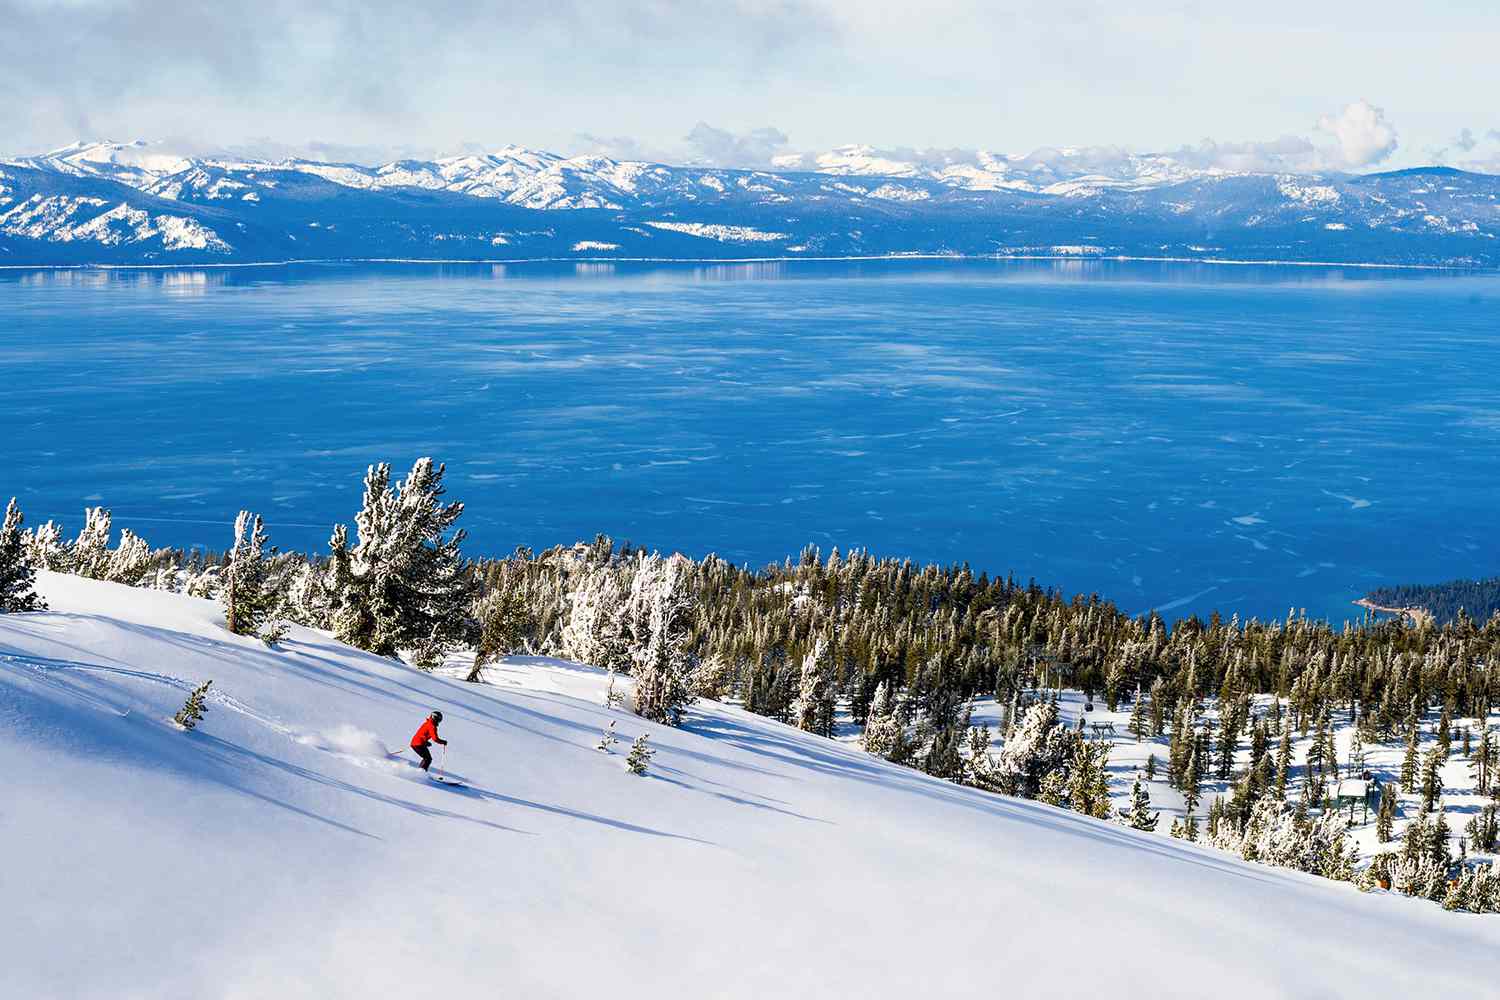 Skiers enjoying a sunny day on the slopes of Lake Tahoe